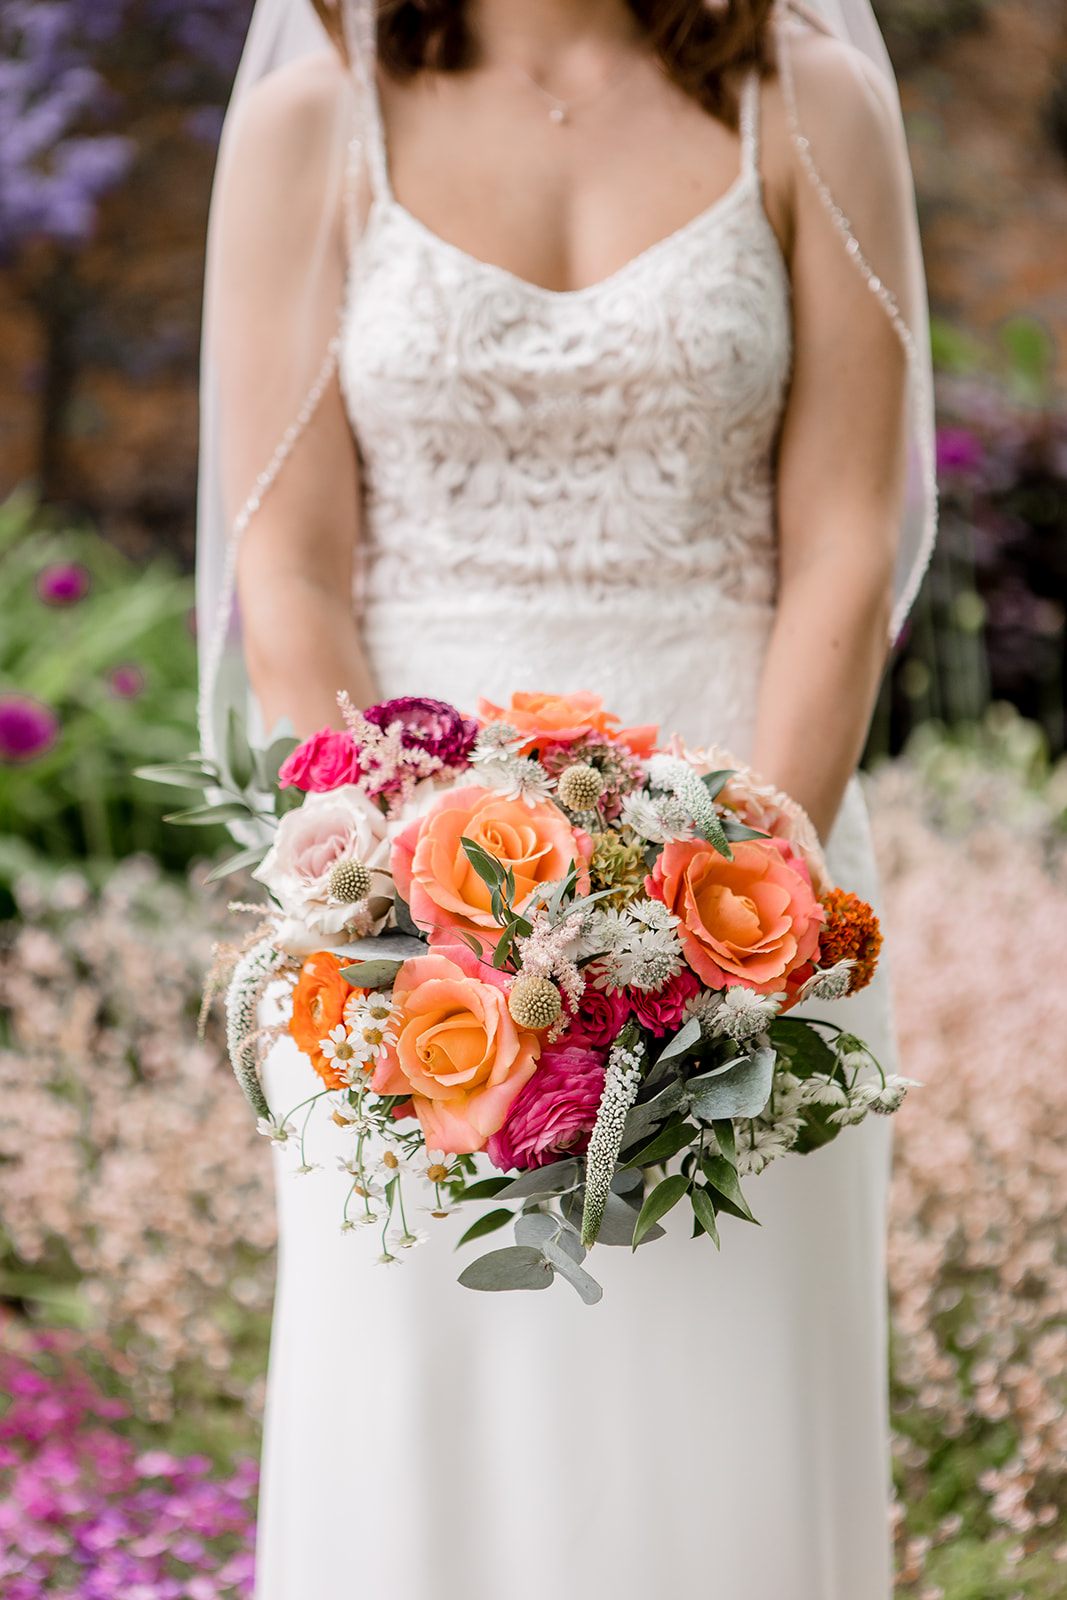 Bridal bouquet with orange and pink flowers